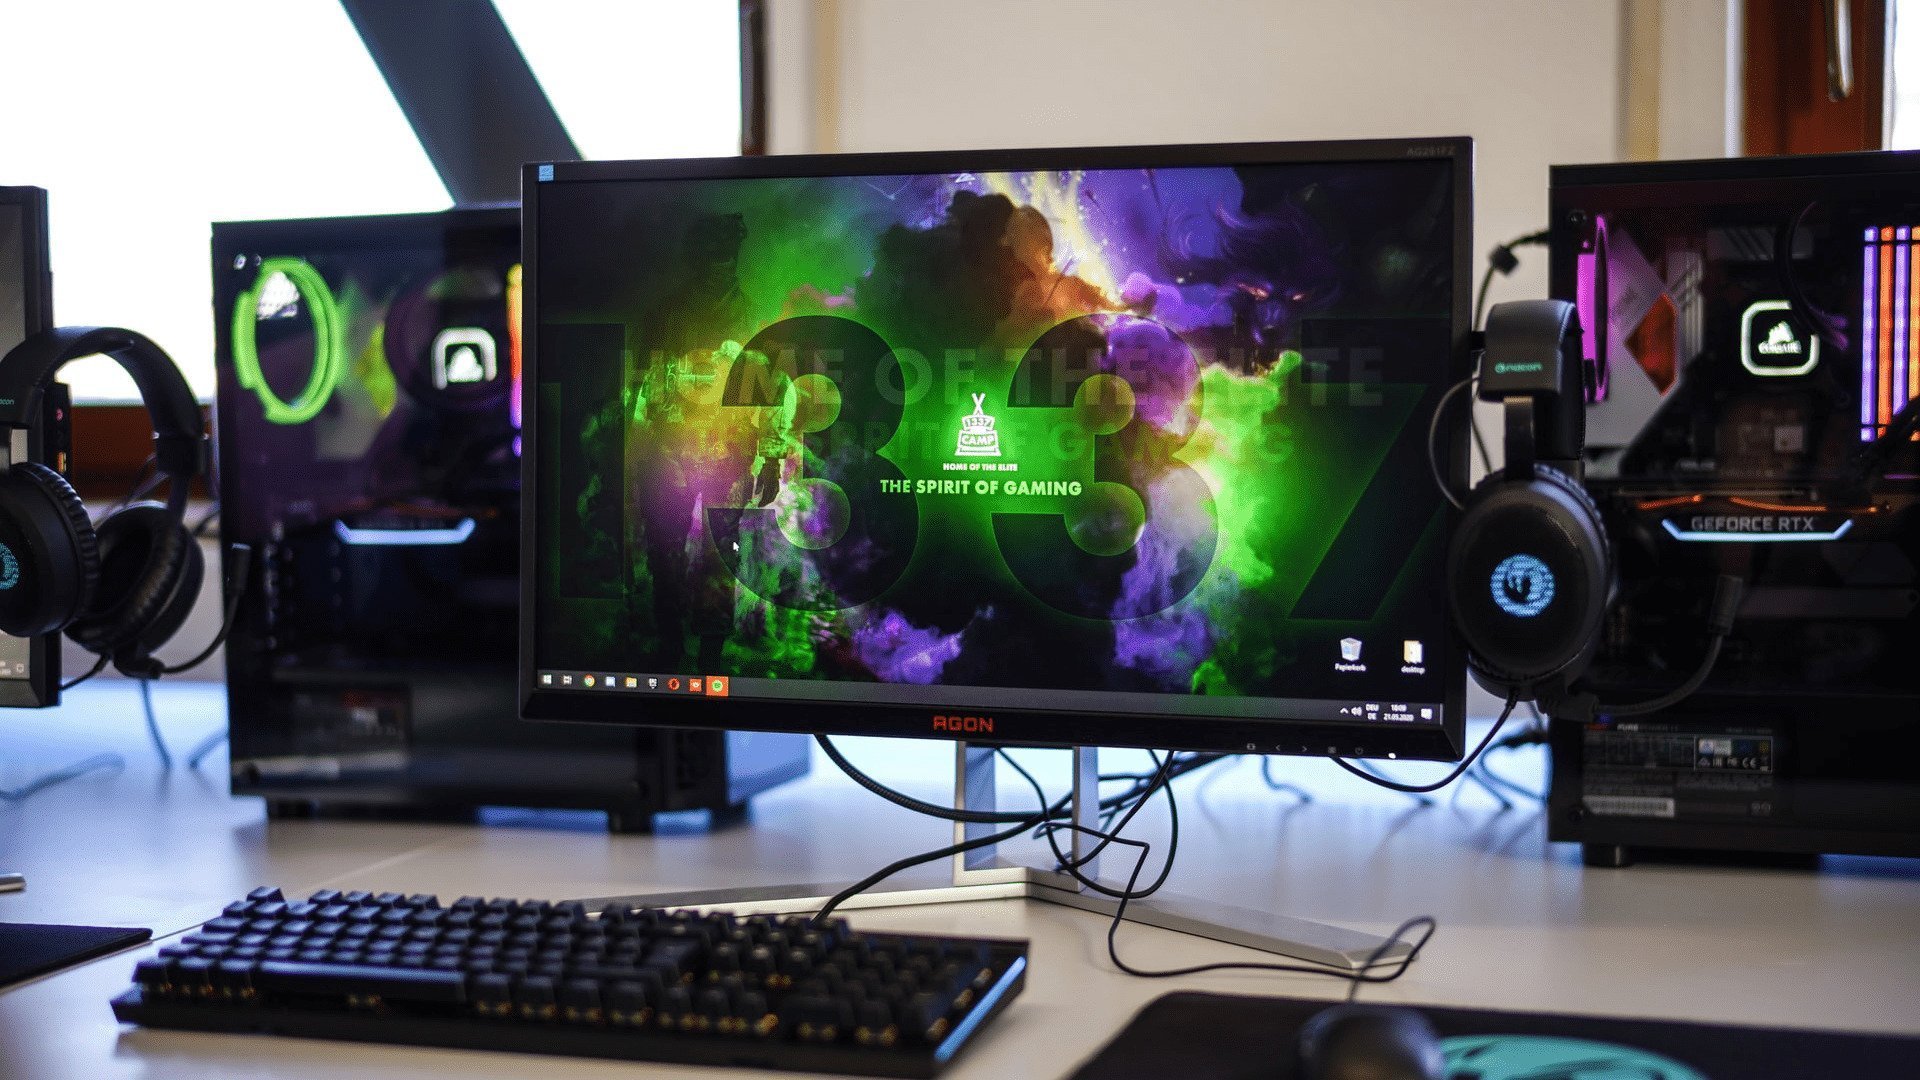 Streaming and Gaming PC Setup / Photo by ELLA DON on Unsplash